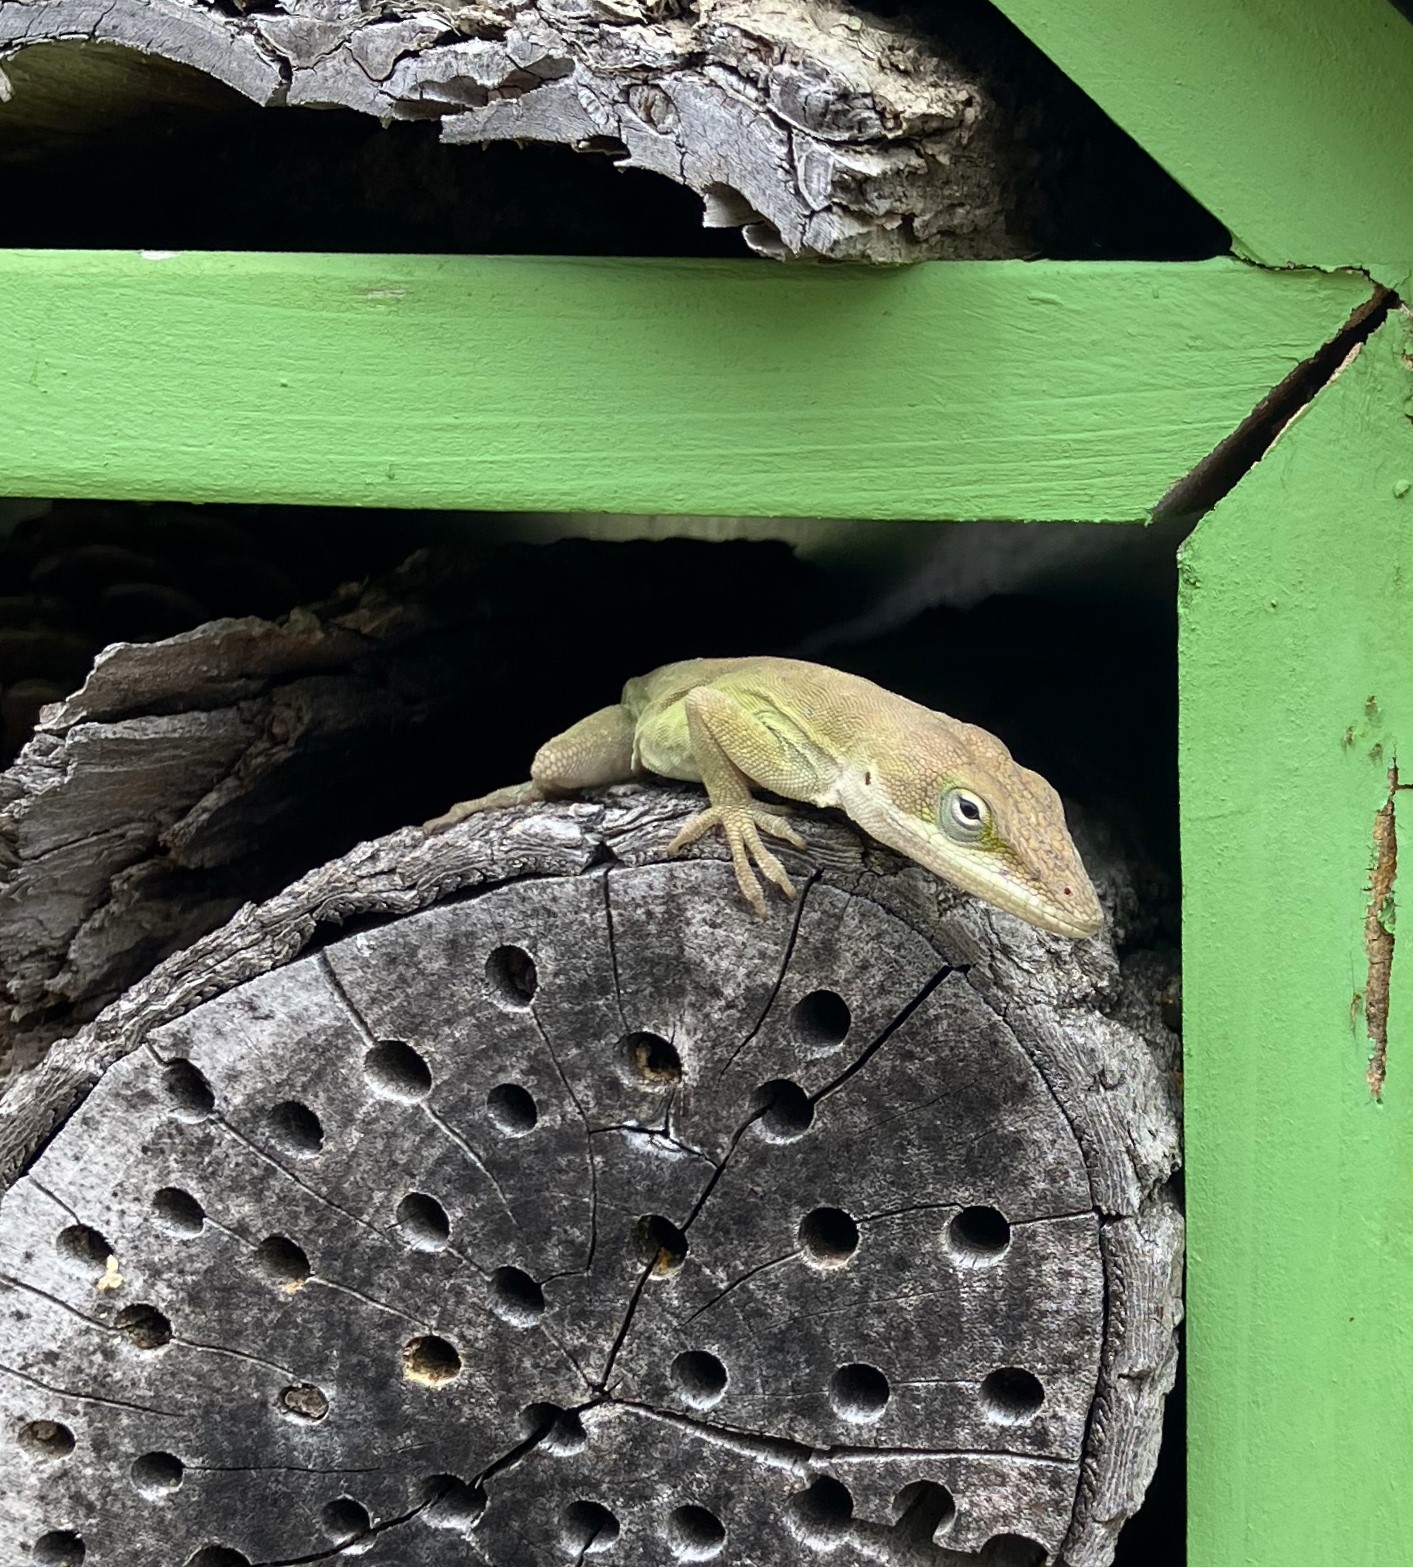 A wooden green frame holds several logs with holes drilled in the ends to provide nesting sites for solitary bees. A green lizard is sitting on top of one of the logs.